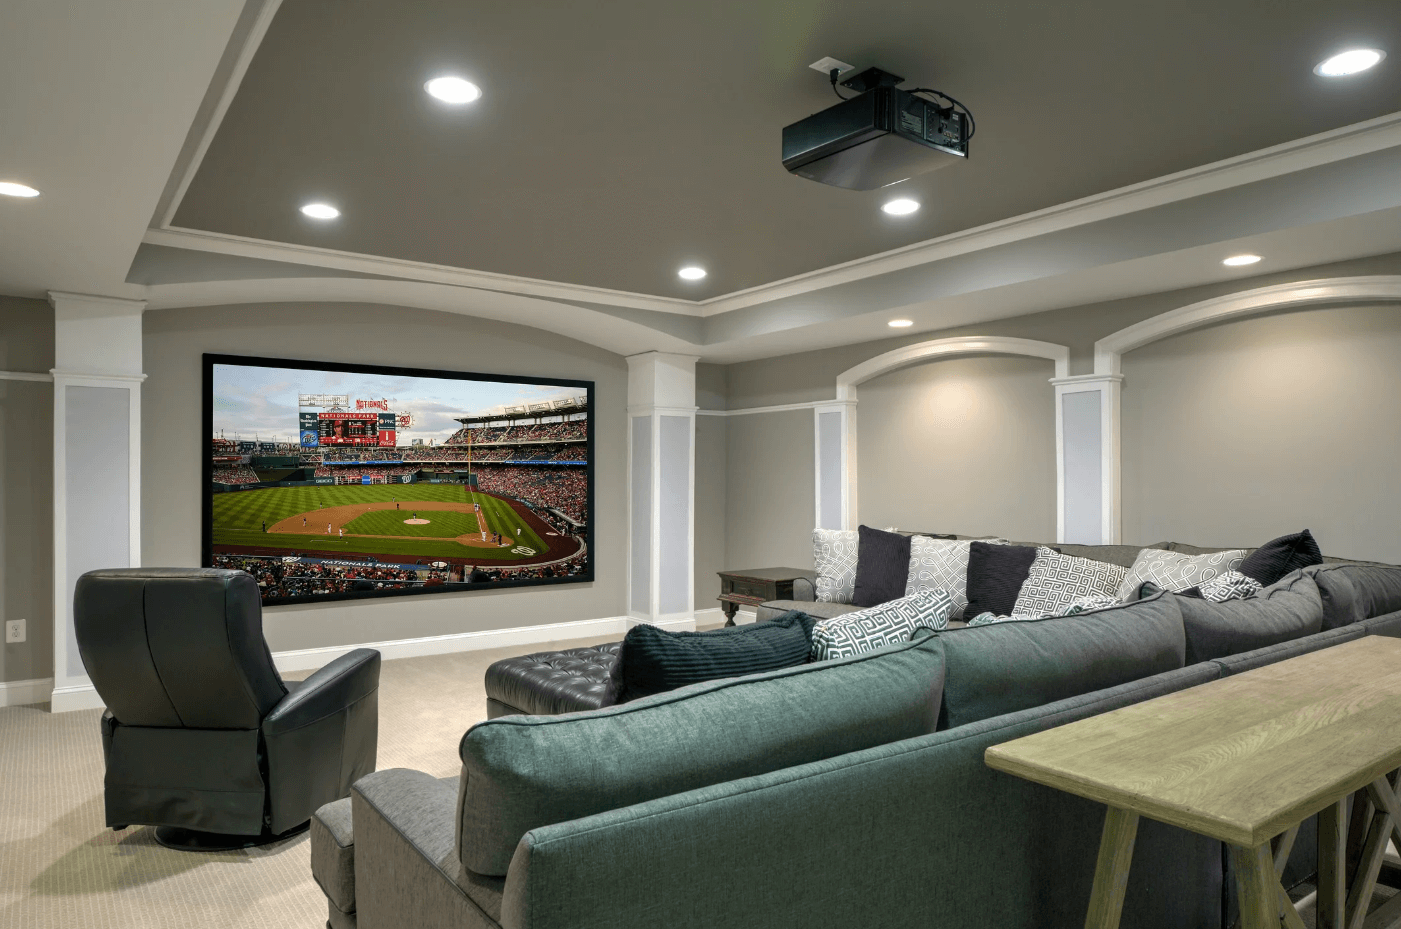 5 Ideas For Your Unfinished Basement